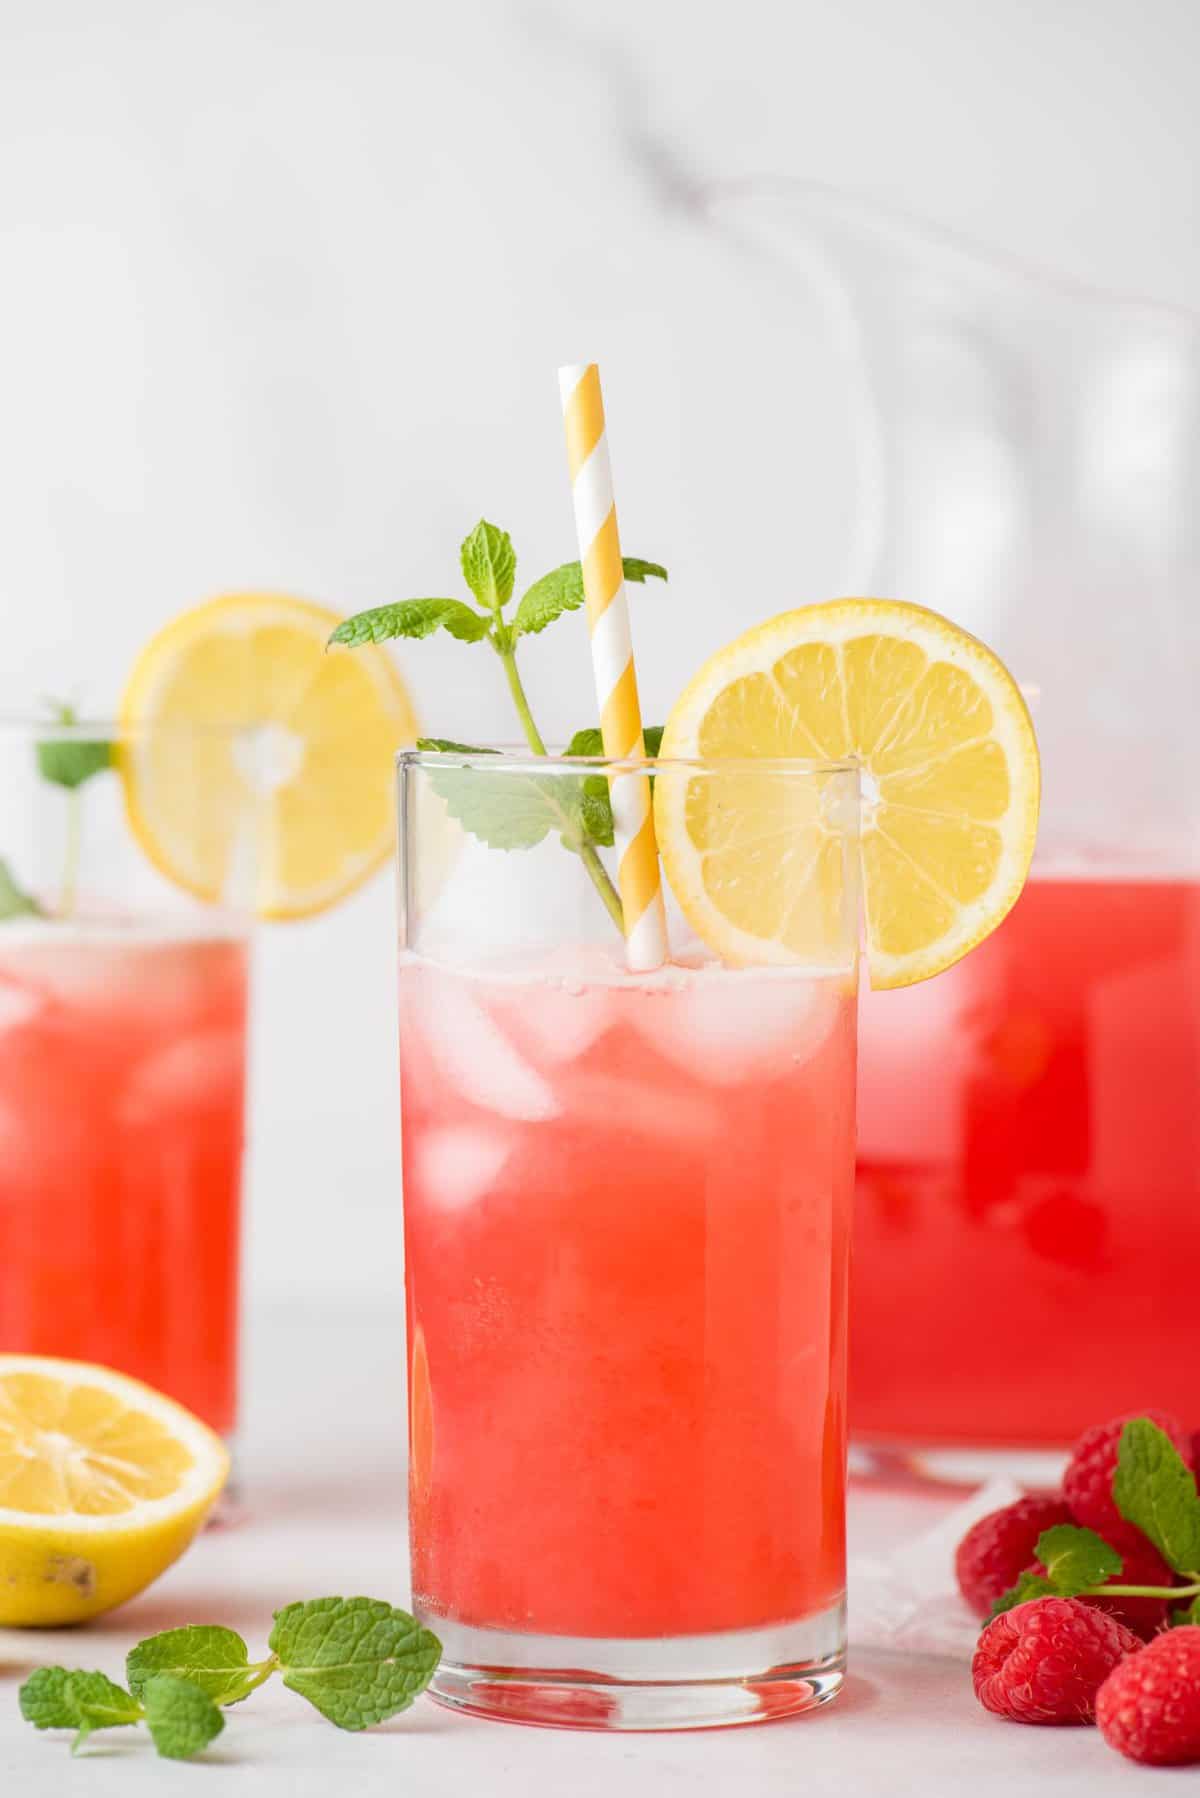 Glass of raspberry lemonade garnished with sliced lemon, mint leaves, and striped paper straw